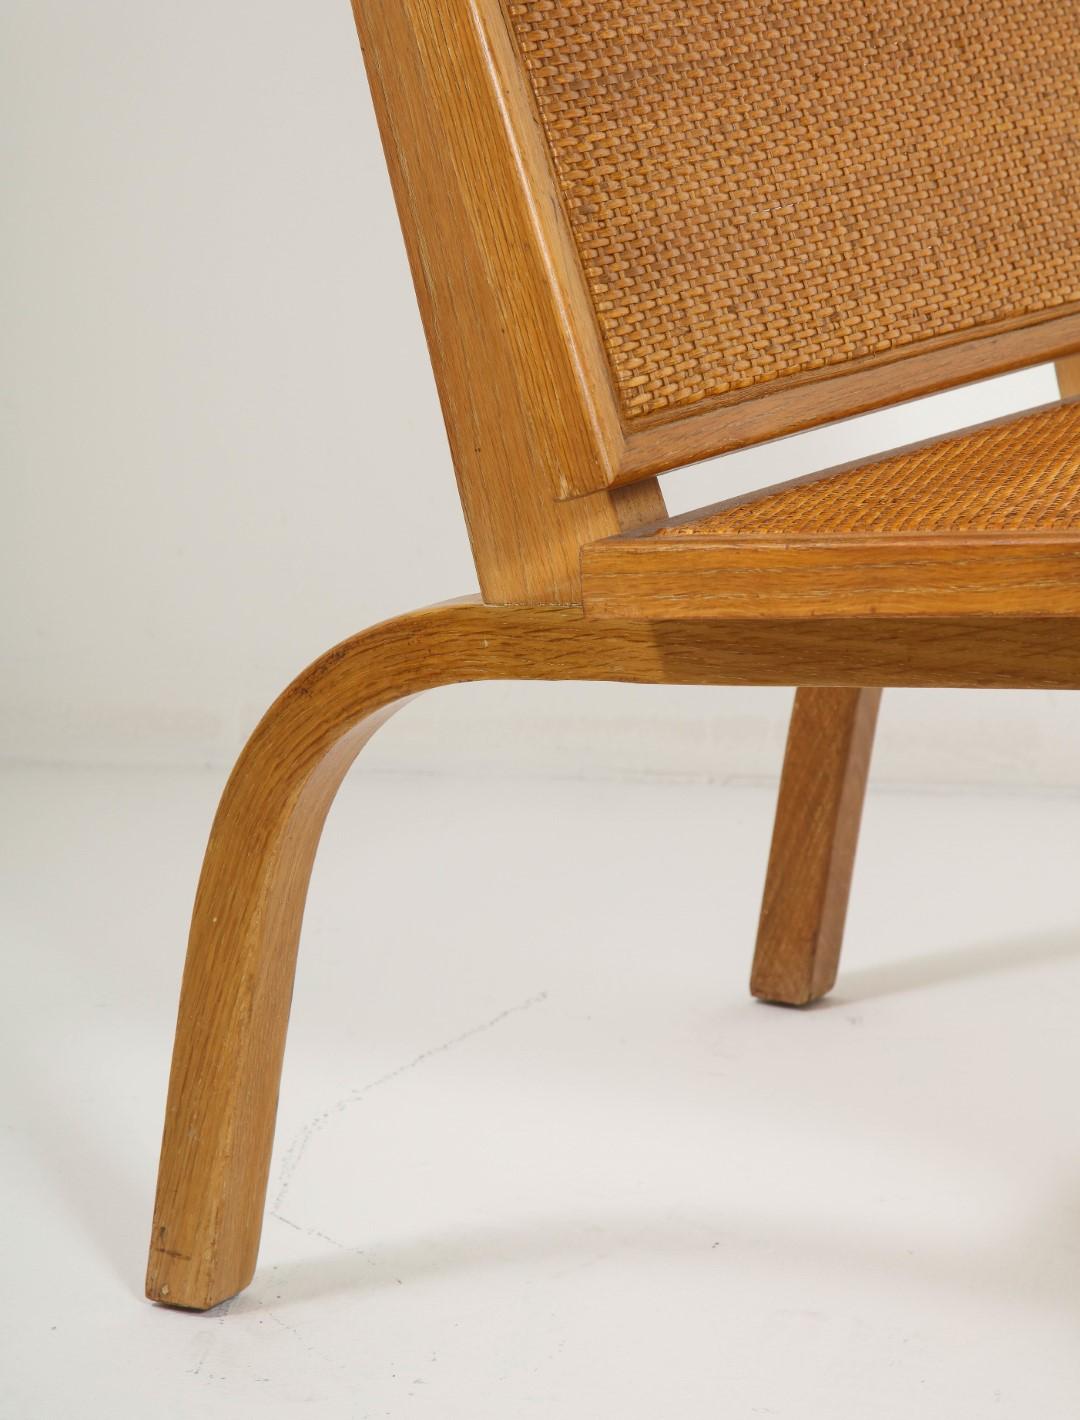 Midcentury Woven Oak Lounge Chair by Edward Durell Stone for Fulbright For Sale 2